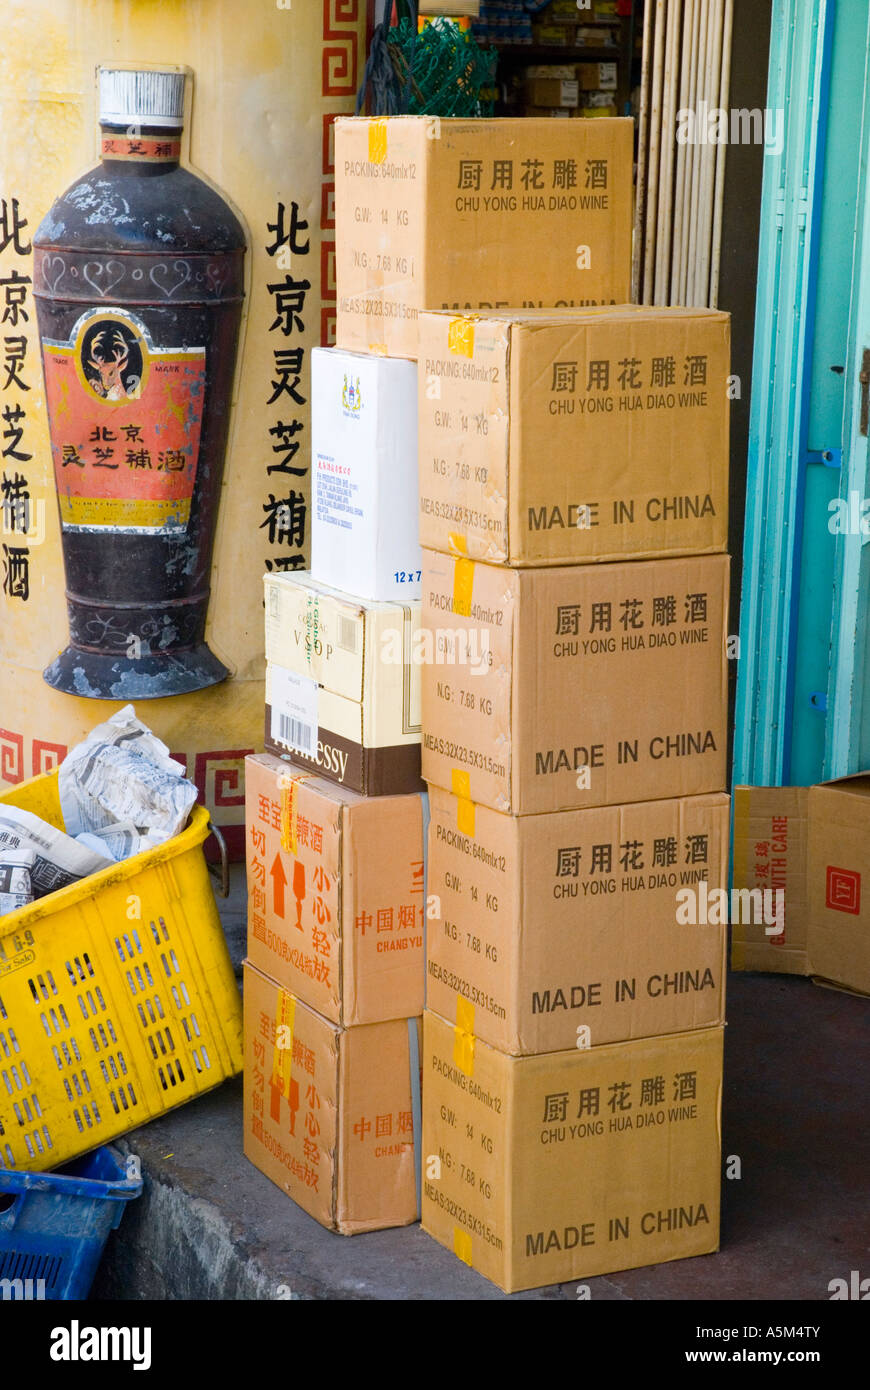 https://c8.alamy.com/comp/A5M4TY/boxes-of-products-made-in-china-stacked-on-the-pavement-outside-a-A5M4TY.jpg